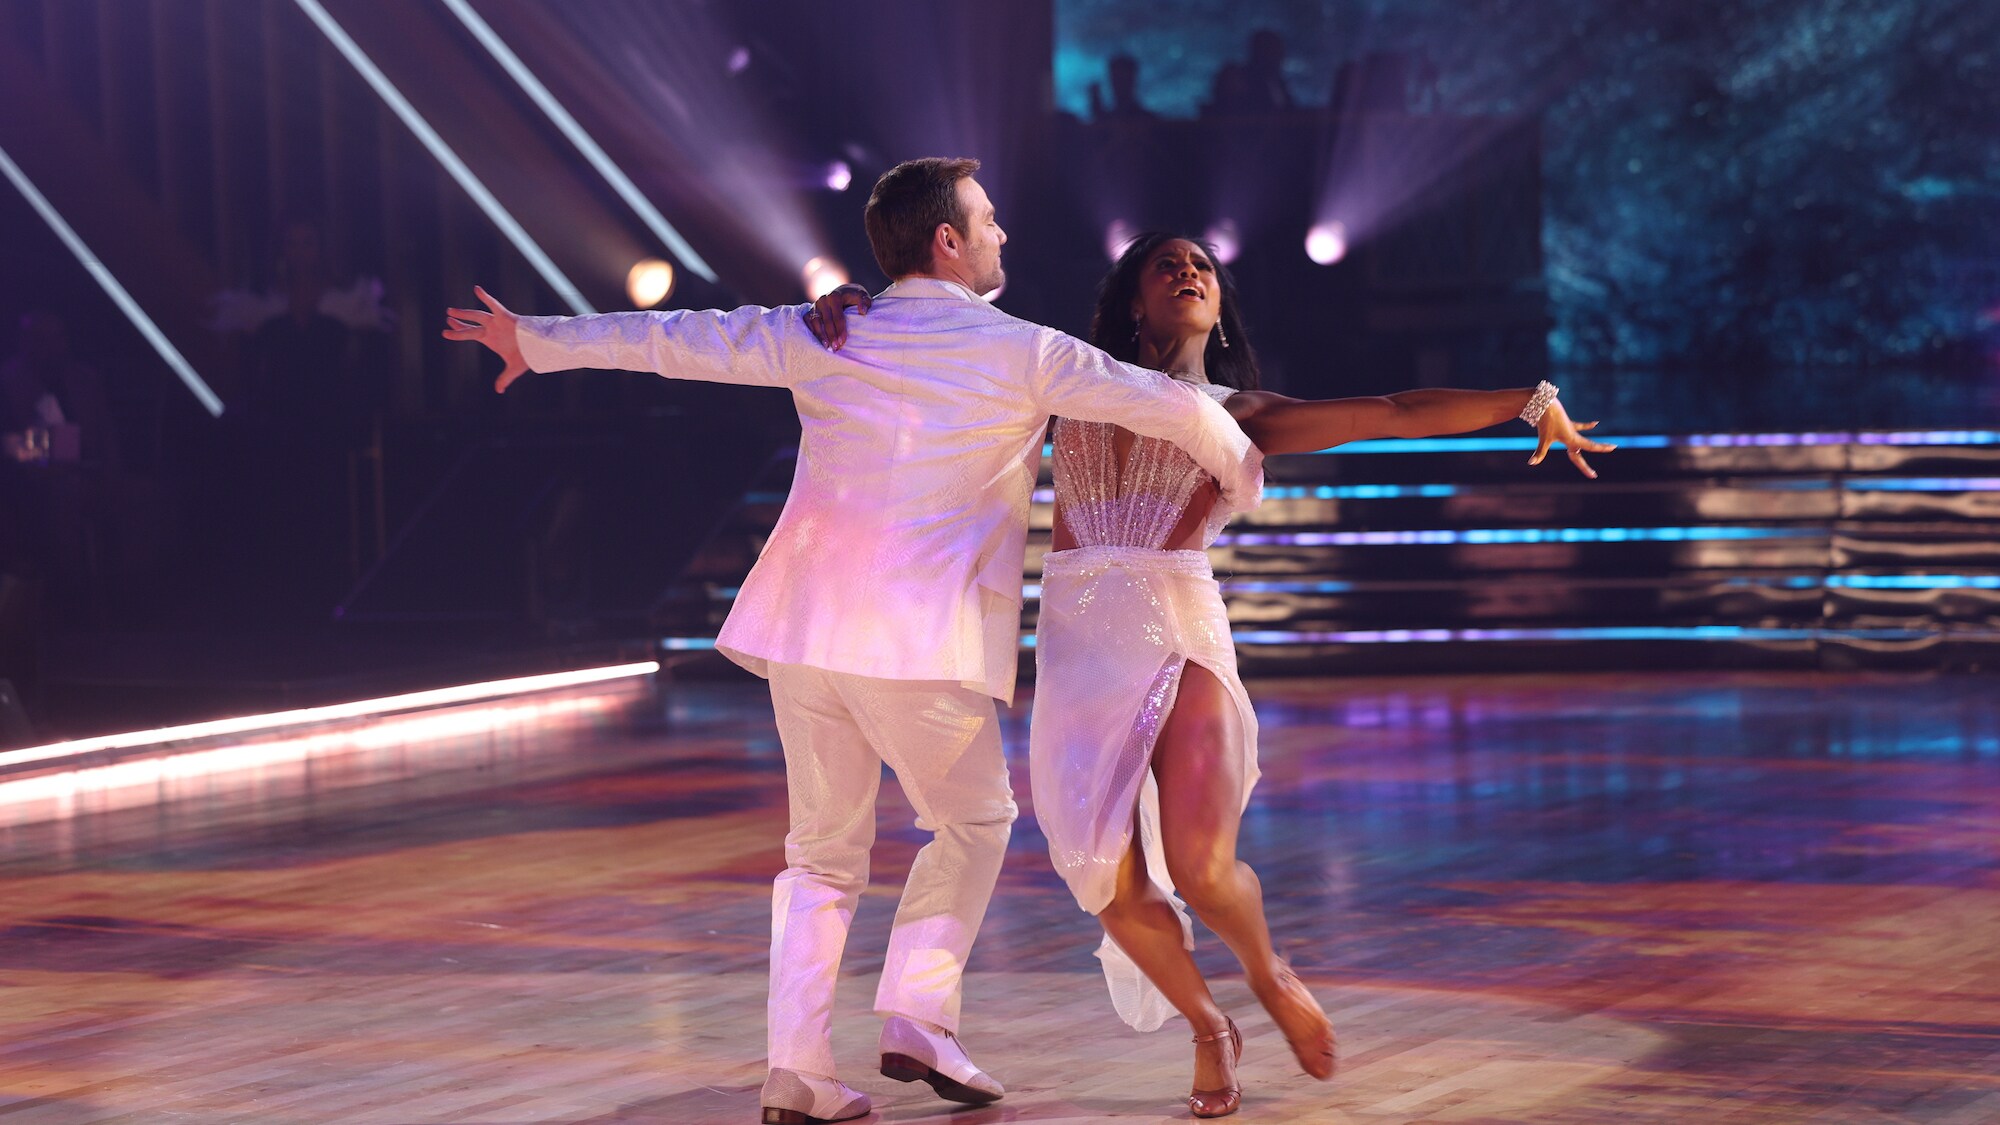 DANCING WITH THE STARS - “Semi-Finals” – The mirrorball competition heats up as the six remaining contestants head into the “Semi-Finals.” Each couple will perform two all-new routines as they fight for a spot in the finale. A new episode of “Dancing with the Stars” will stream live MONDAY, NOV. 14 (8:00pm ET / 5:00pm PT), on Disney+. (ABC/Raymond Liu) DANIEL DURANT, BRITT STEWART